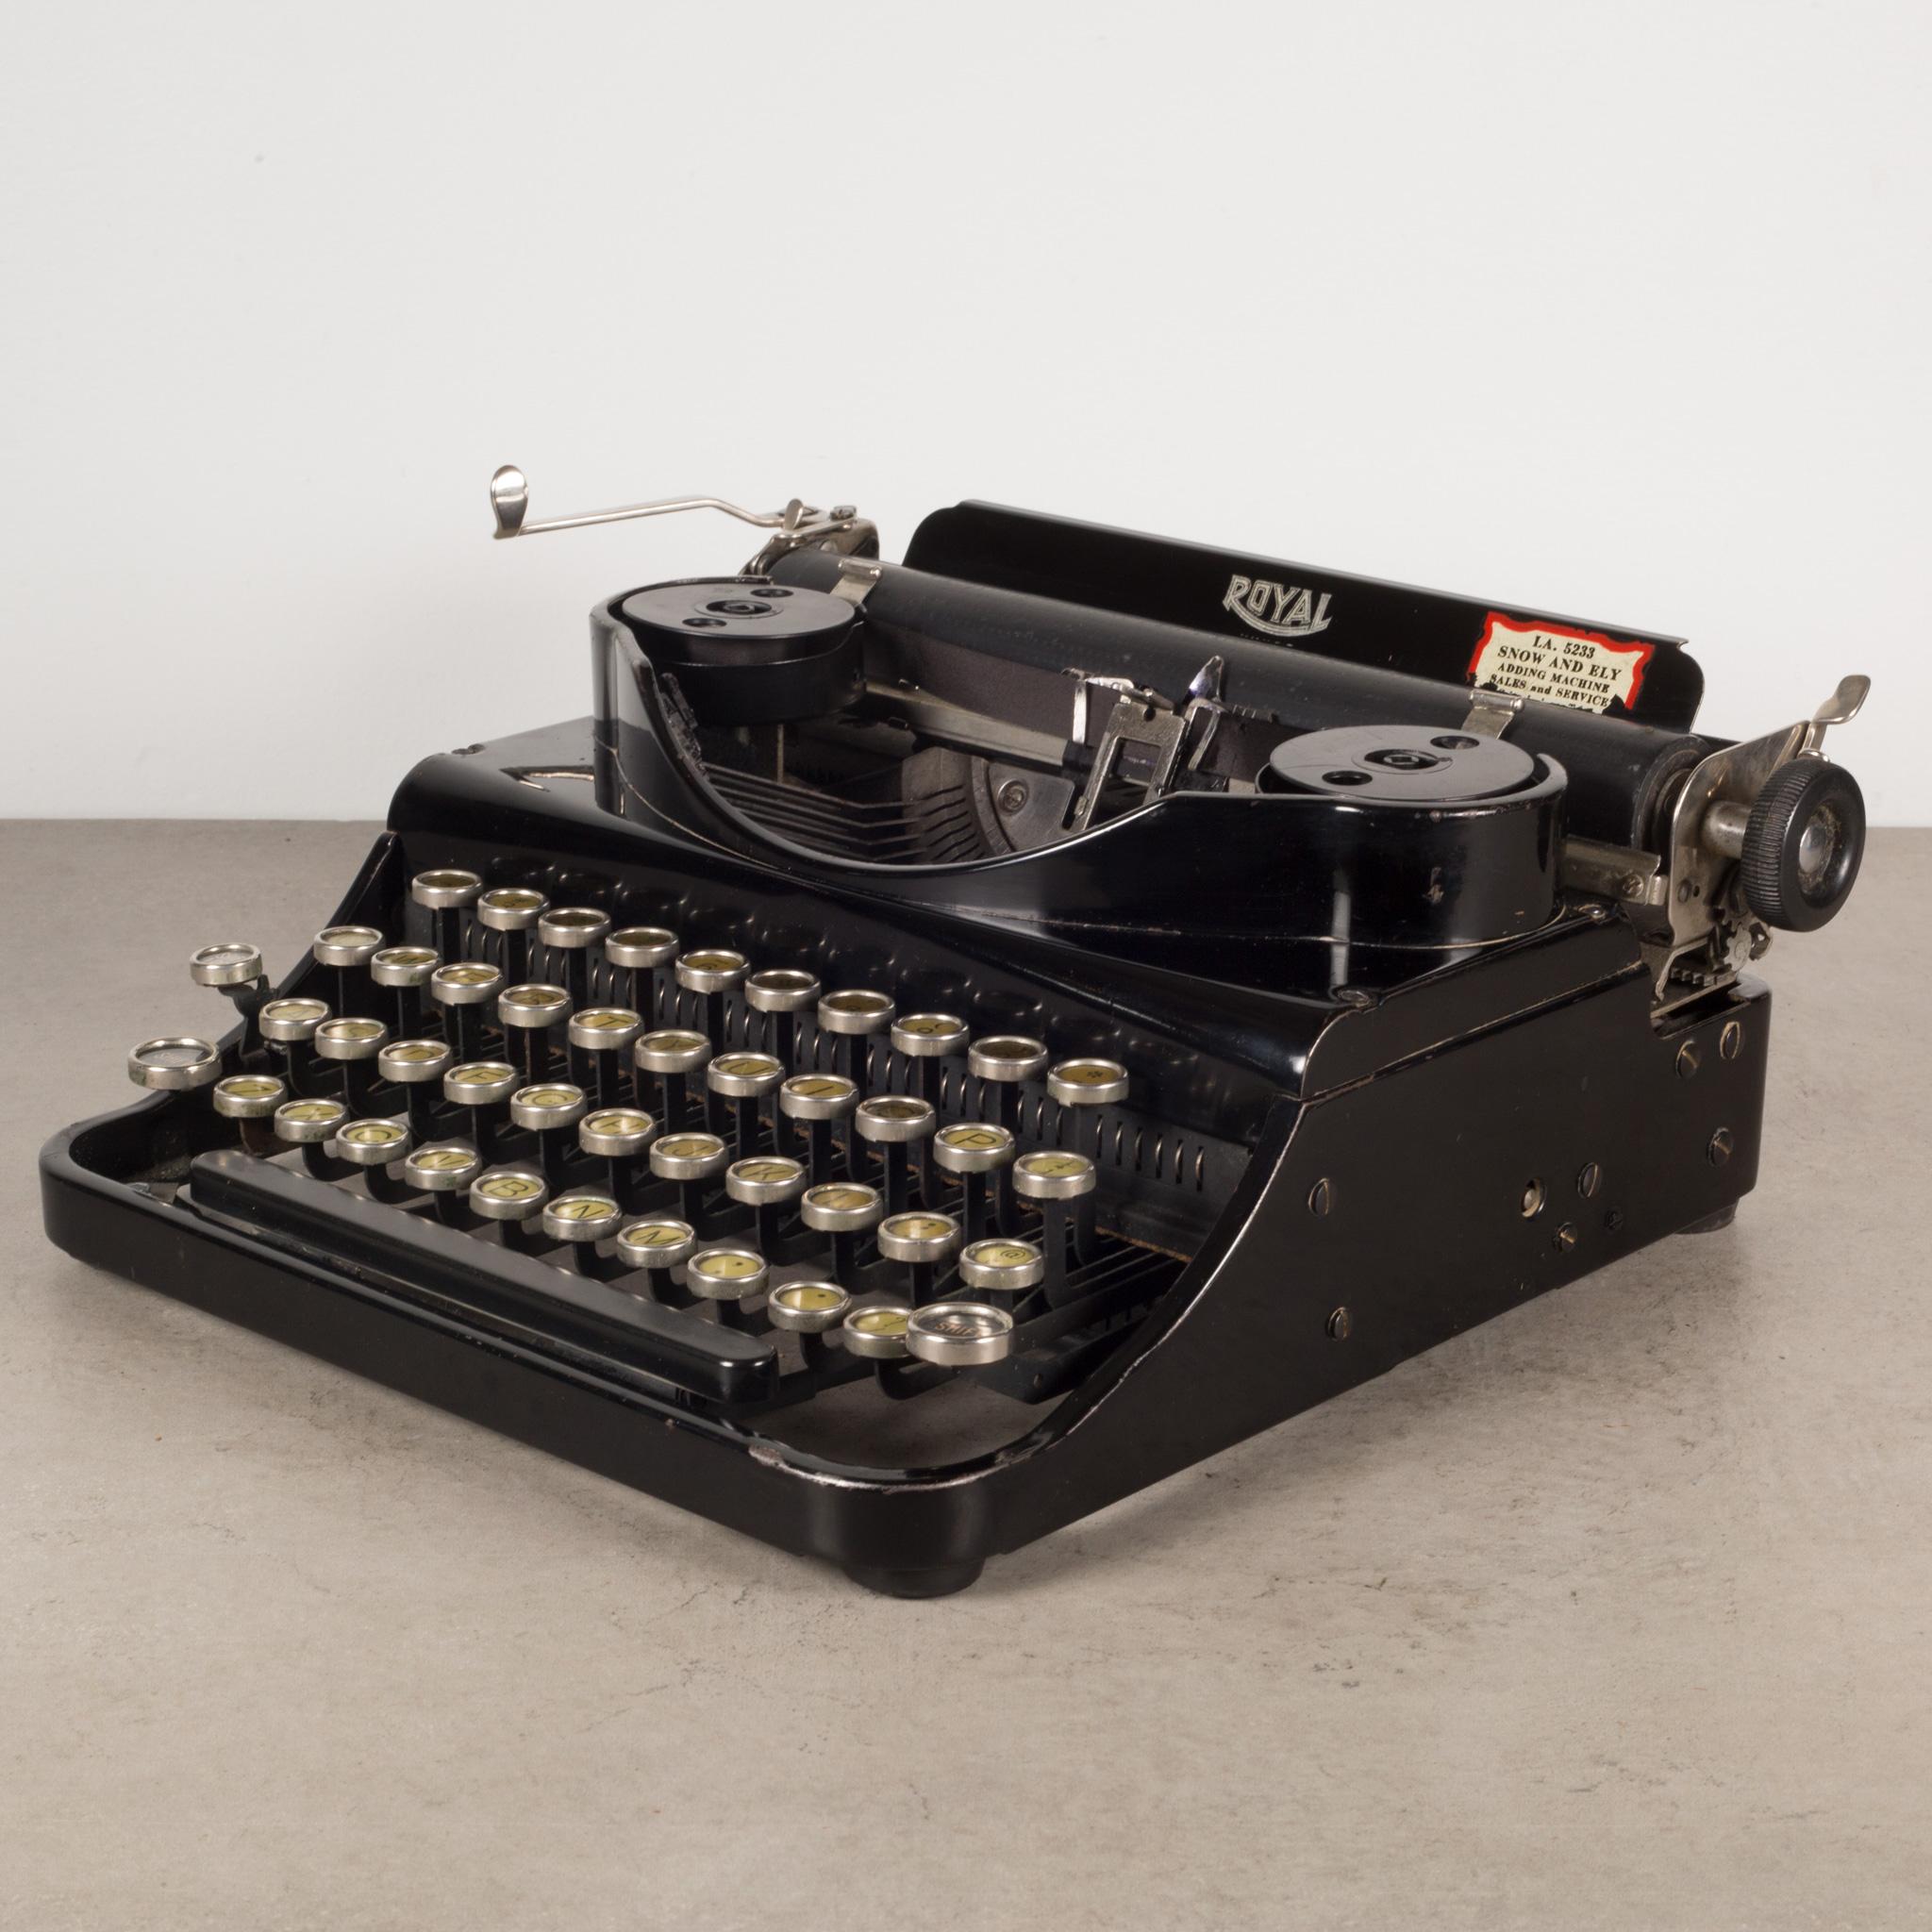 About

This is a depression era refurbished Royal Junior portable typewriter in the original case with leather handle. The keys are nickle and glass with black and greenish-yellow letters. This typewriter has smooth typing and the carriage moves